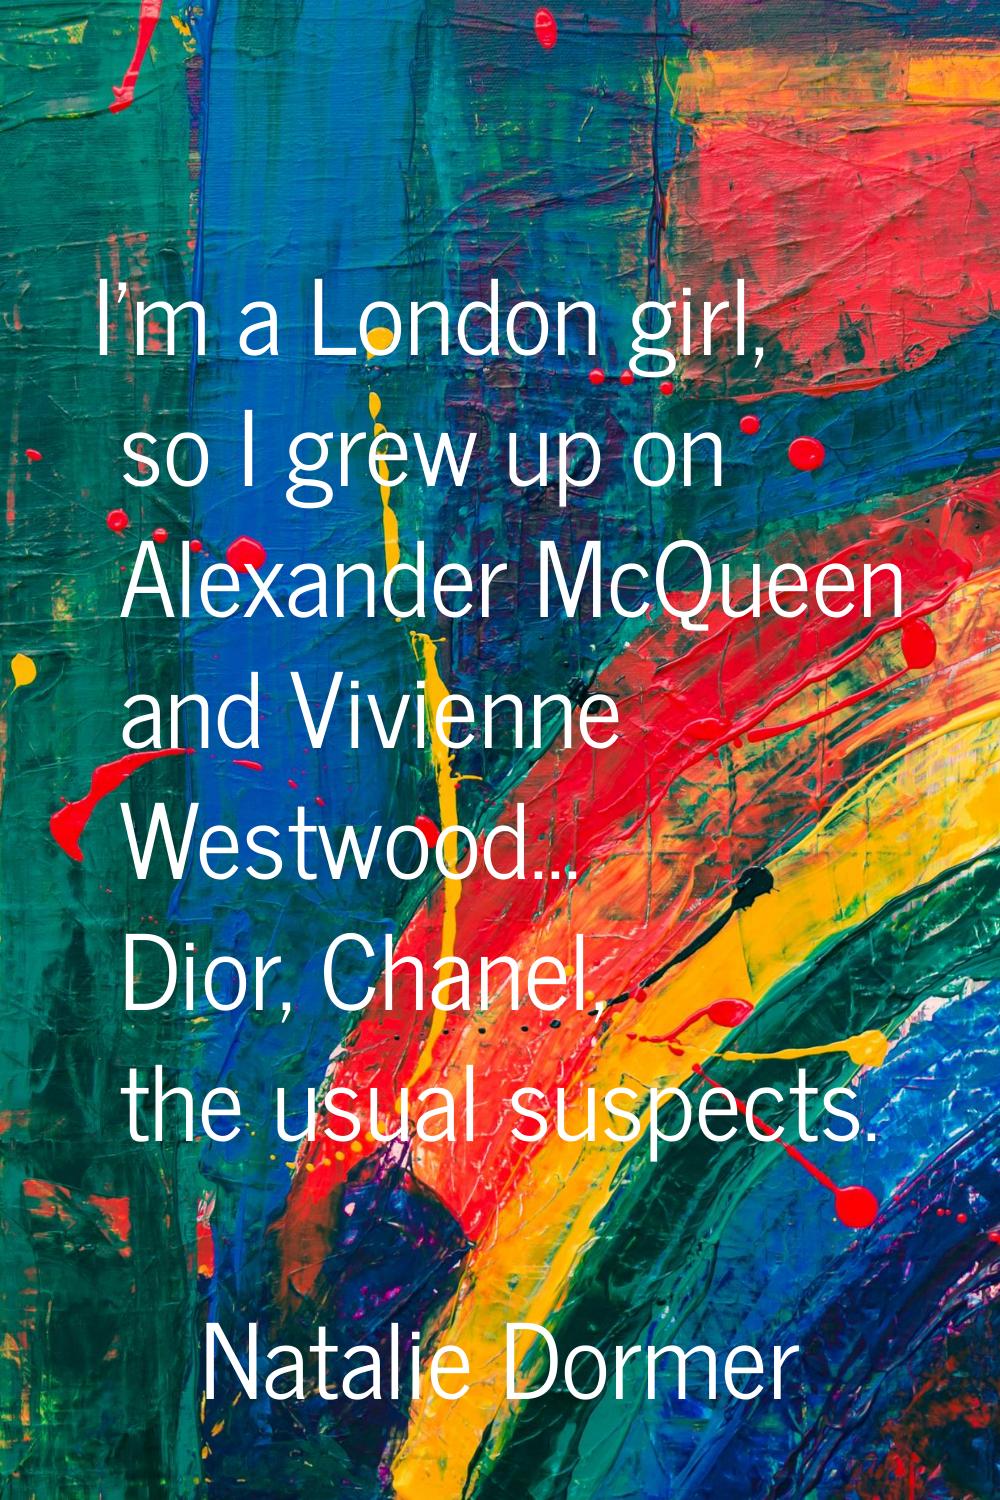 I'm a London girl, so I grew up on Alexander McQueen and Vivienne Westwood... Dior, Chanel, the usu